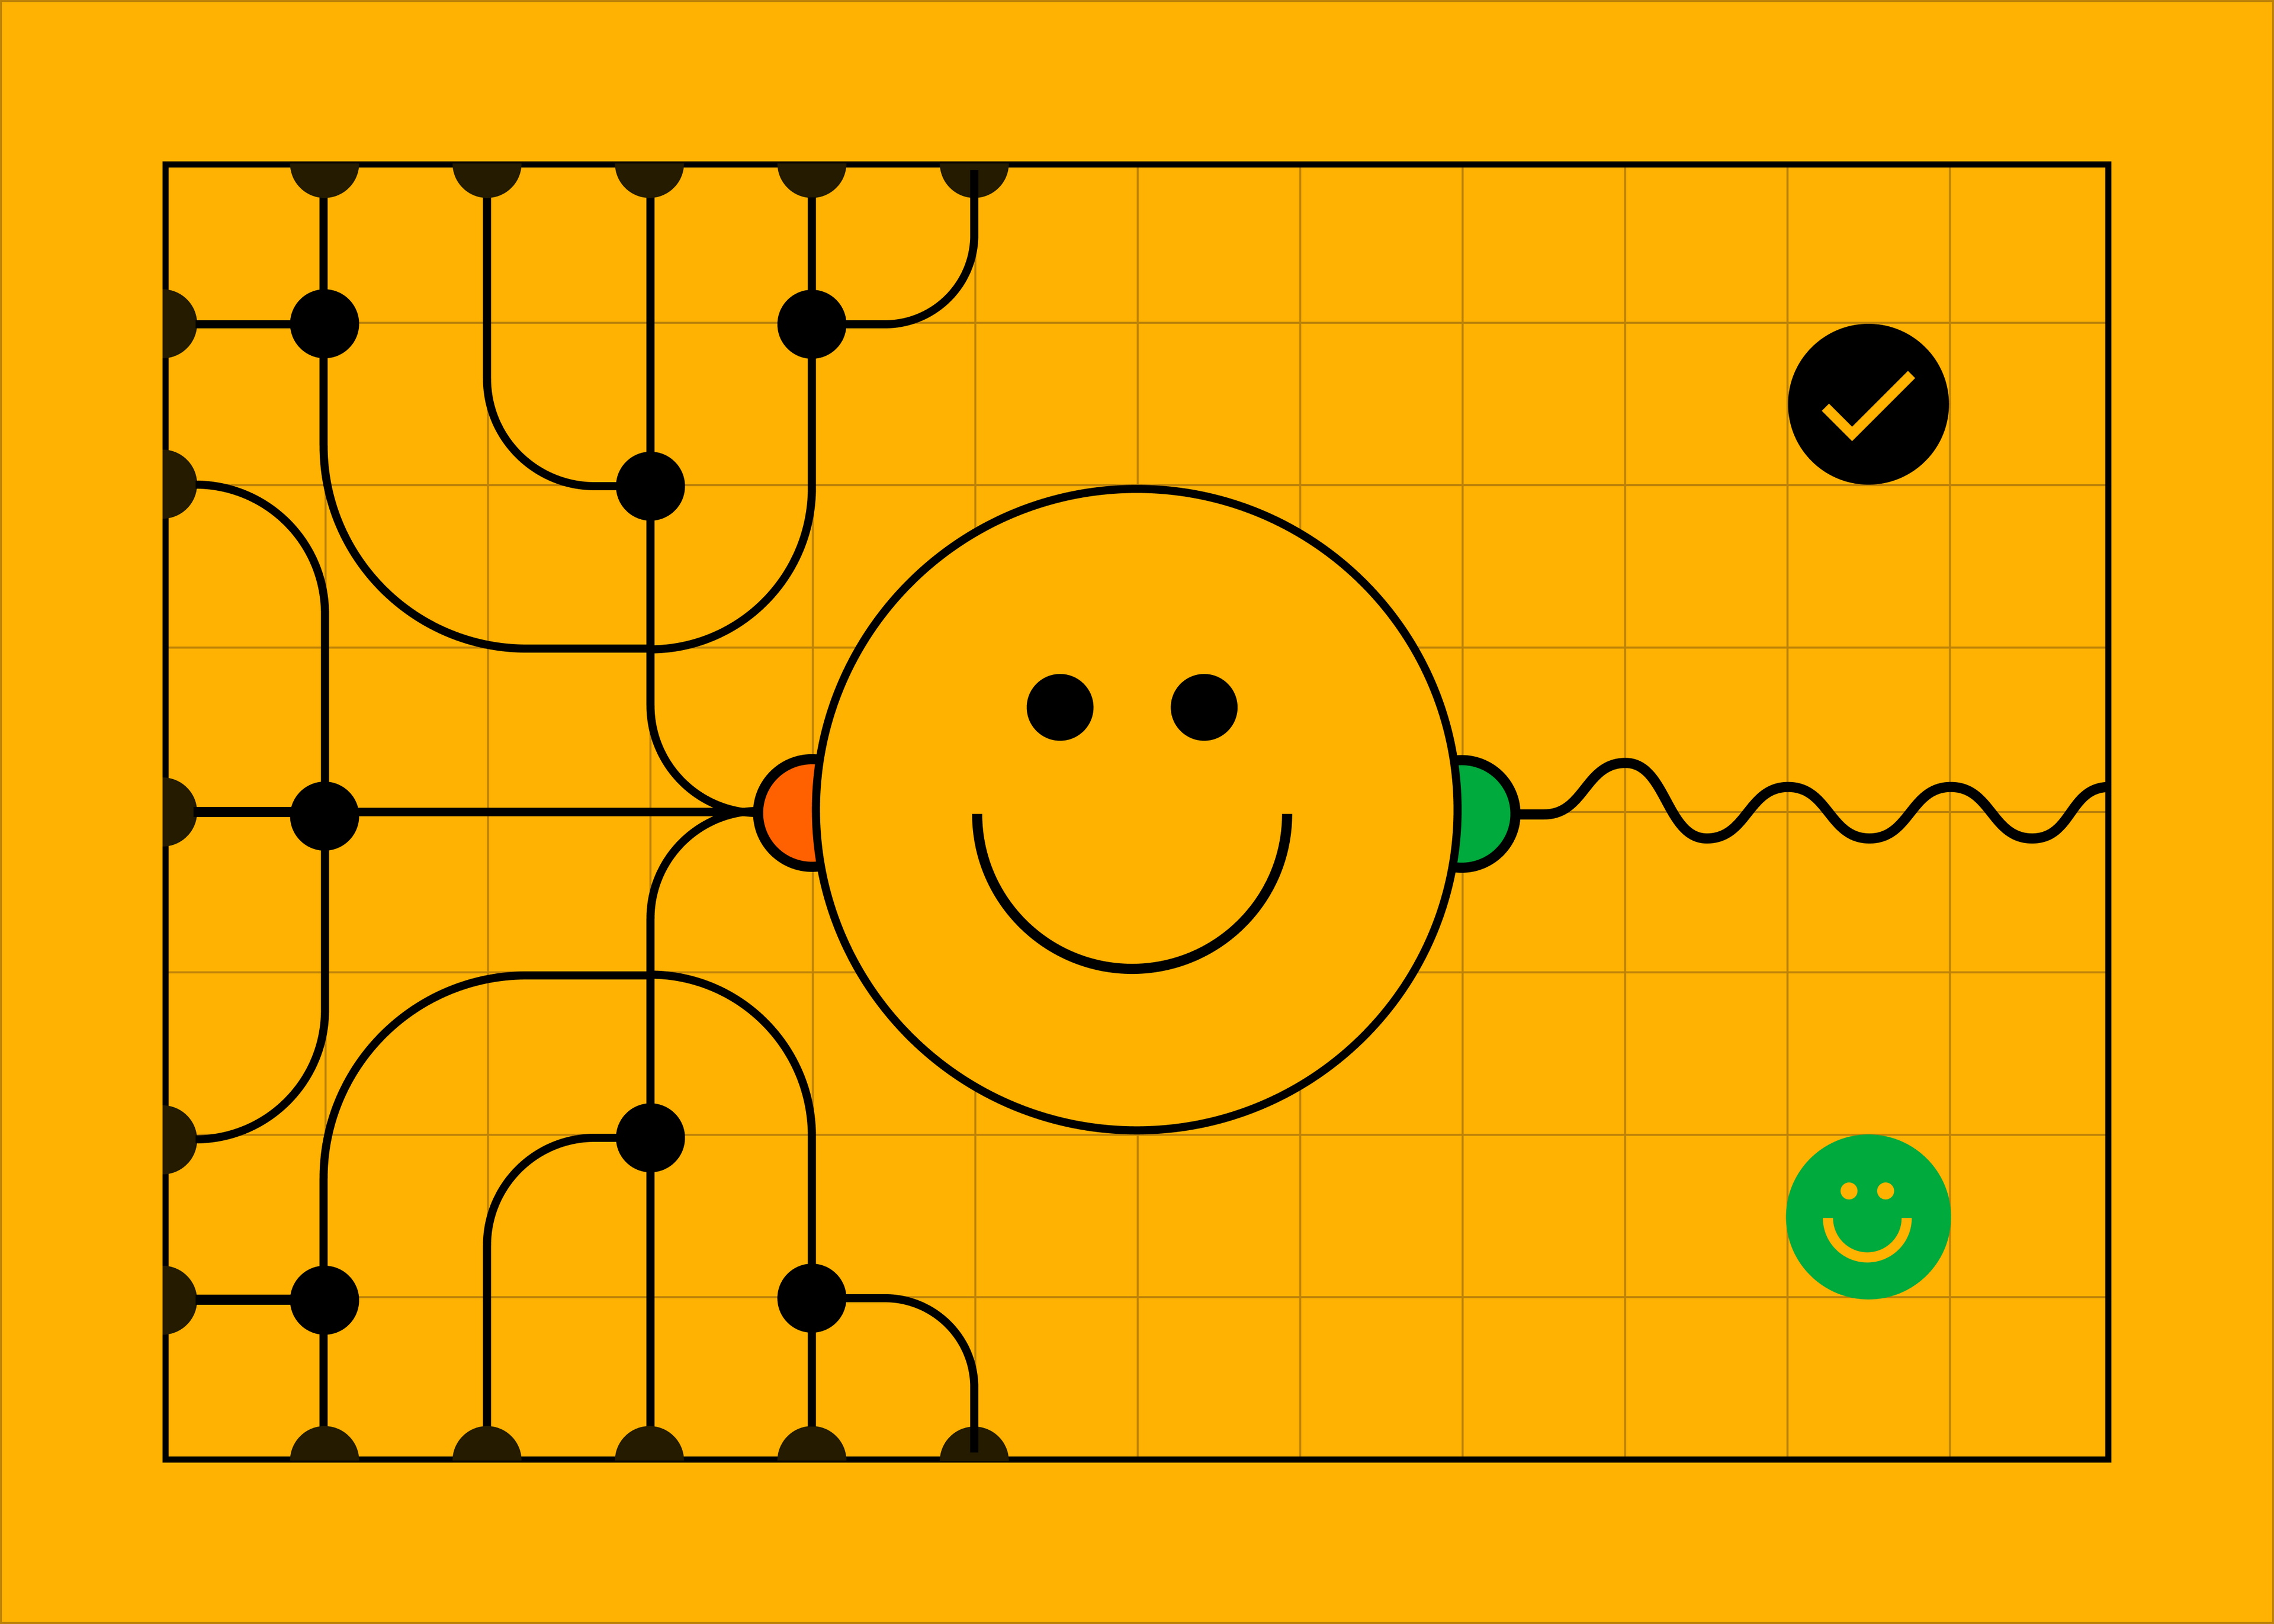 The image serves as a symbolic representation of the challenges and processes associated with load testing in the realm of web applications.  At the core of the depiction is a classic smiley face, which can be seen as the web application itself. It stands resilient and contented, an emblem of a well-optimized system that aims to please its users. The simple and cheerful expression on the face underscores the desired outcome of any web application: smooth performance and user satisfaction.  From the left, countless disjointed lines approach the ear, each representing different types and intensities of web traffic. These lines may illustrate varied user requests, diverse data inputs, or multiple sessions, echoing the unpredictable nature of user behavior and real-world web traffic. The chaotic convergence into the ear symbolizes the often overwhelming demands placed on a web application during peak times or during an aggressive load test.  Remarkably, from the right ear emanates a pristine sine wave. In contrast to the chaotic influx, this sine wave epitomizes the ideal output: smooth, consistent, and undisturbed performance. It embodies the aspiration of load testing – to transform unpredictable, high-volume requests into consistent and harmonious system performance.  Overall, the imagery compellingly conveys the essence of load testing for web applications: ensuring that amidst the cacophony of diverse user demands, the system delivers a uniform, reliable, and satisfactory user experience.